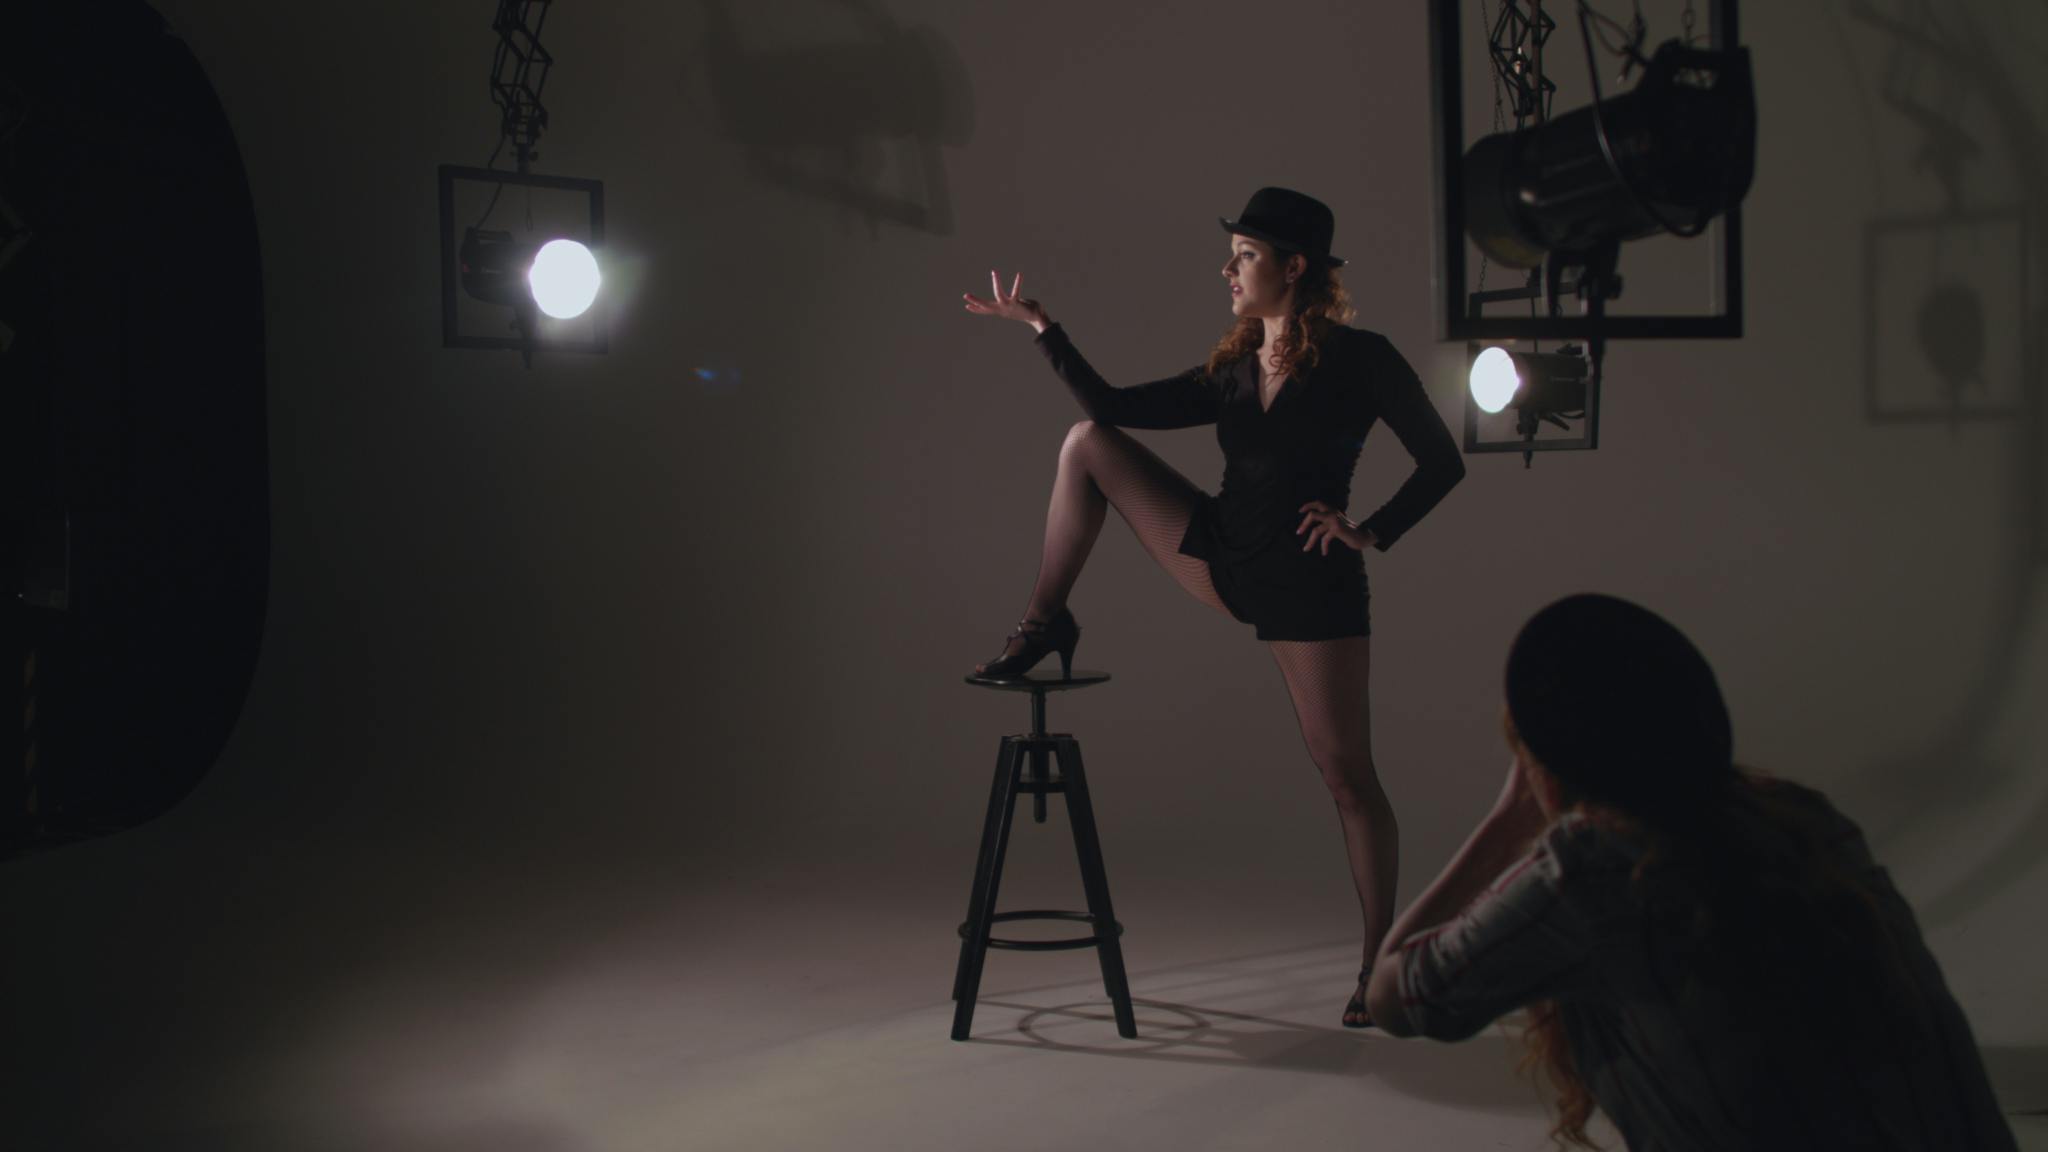 An image featuring a woman in the middle of the shot with her foot up on a stool, wearing a costume, she is surrounded by stage lights and in the foreground a photographer takes her image